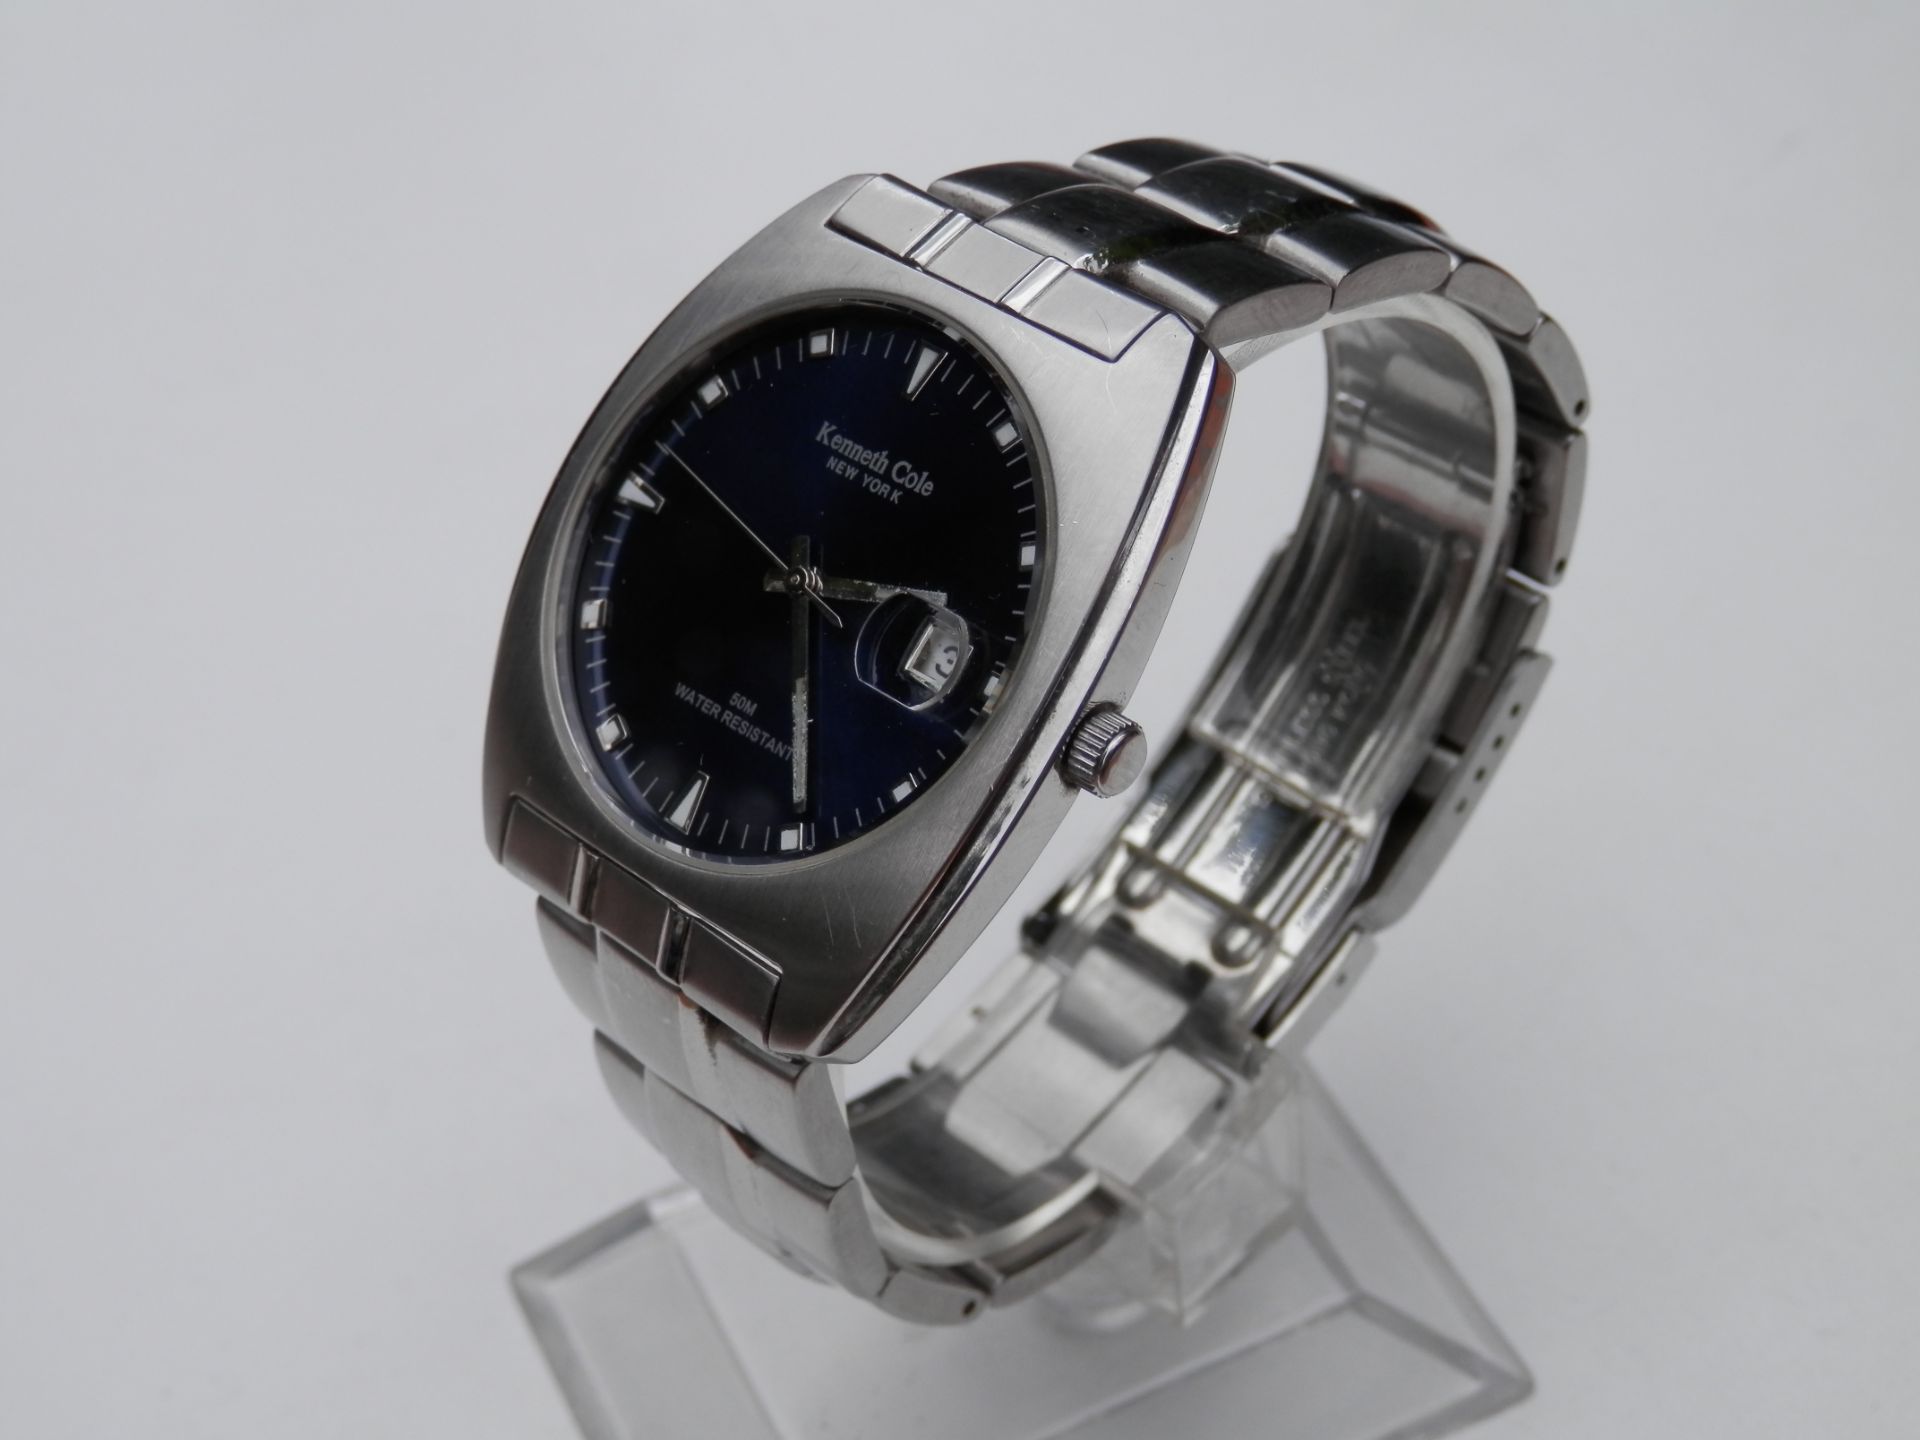 GENTS BOXED KENNETH COLE NEW YORK, FULL STAINLESS 50M WR QUARTZ DATE WATCH, FULLY WORKING. RRP $125 - Image 5 of 11